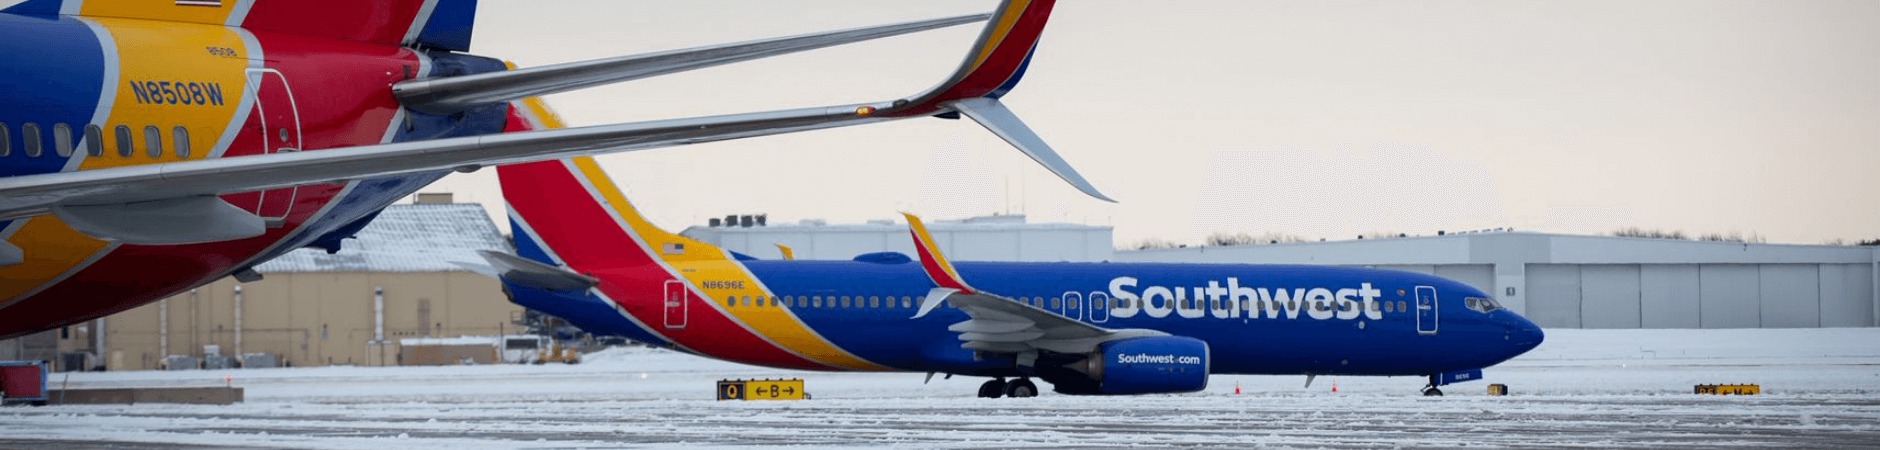 southwest airlines plane on tarmac in winter